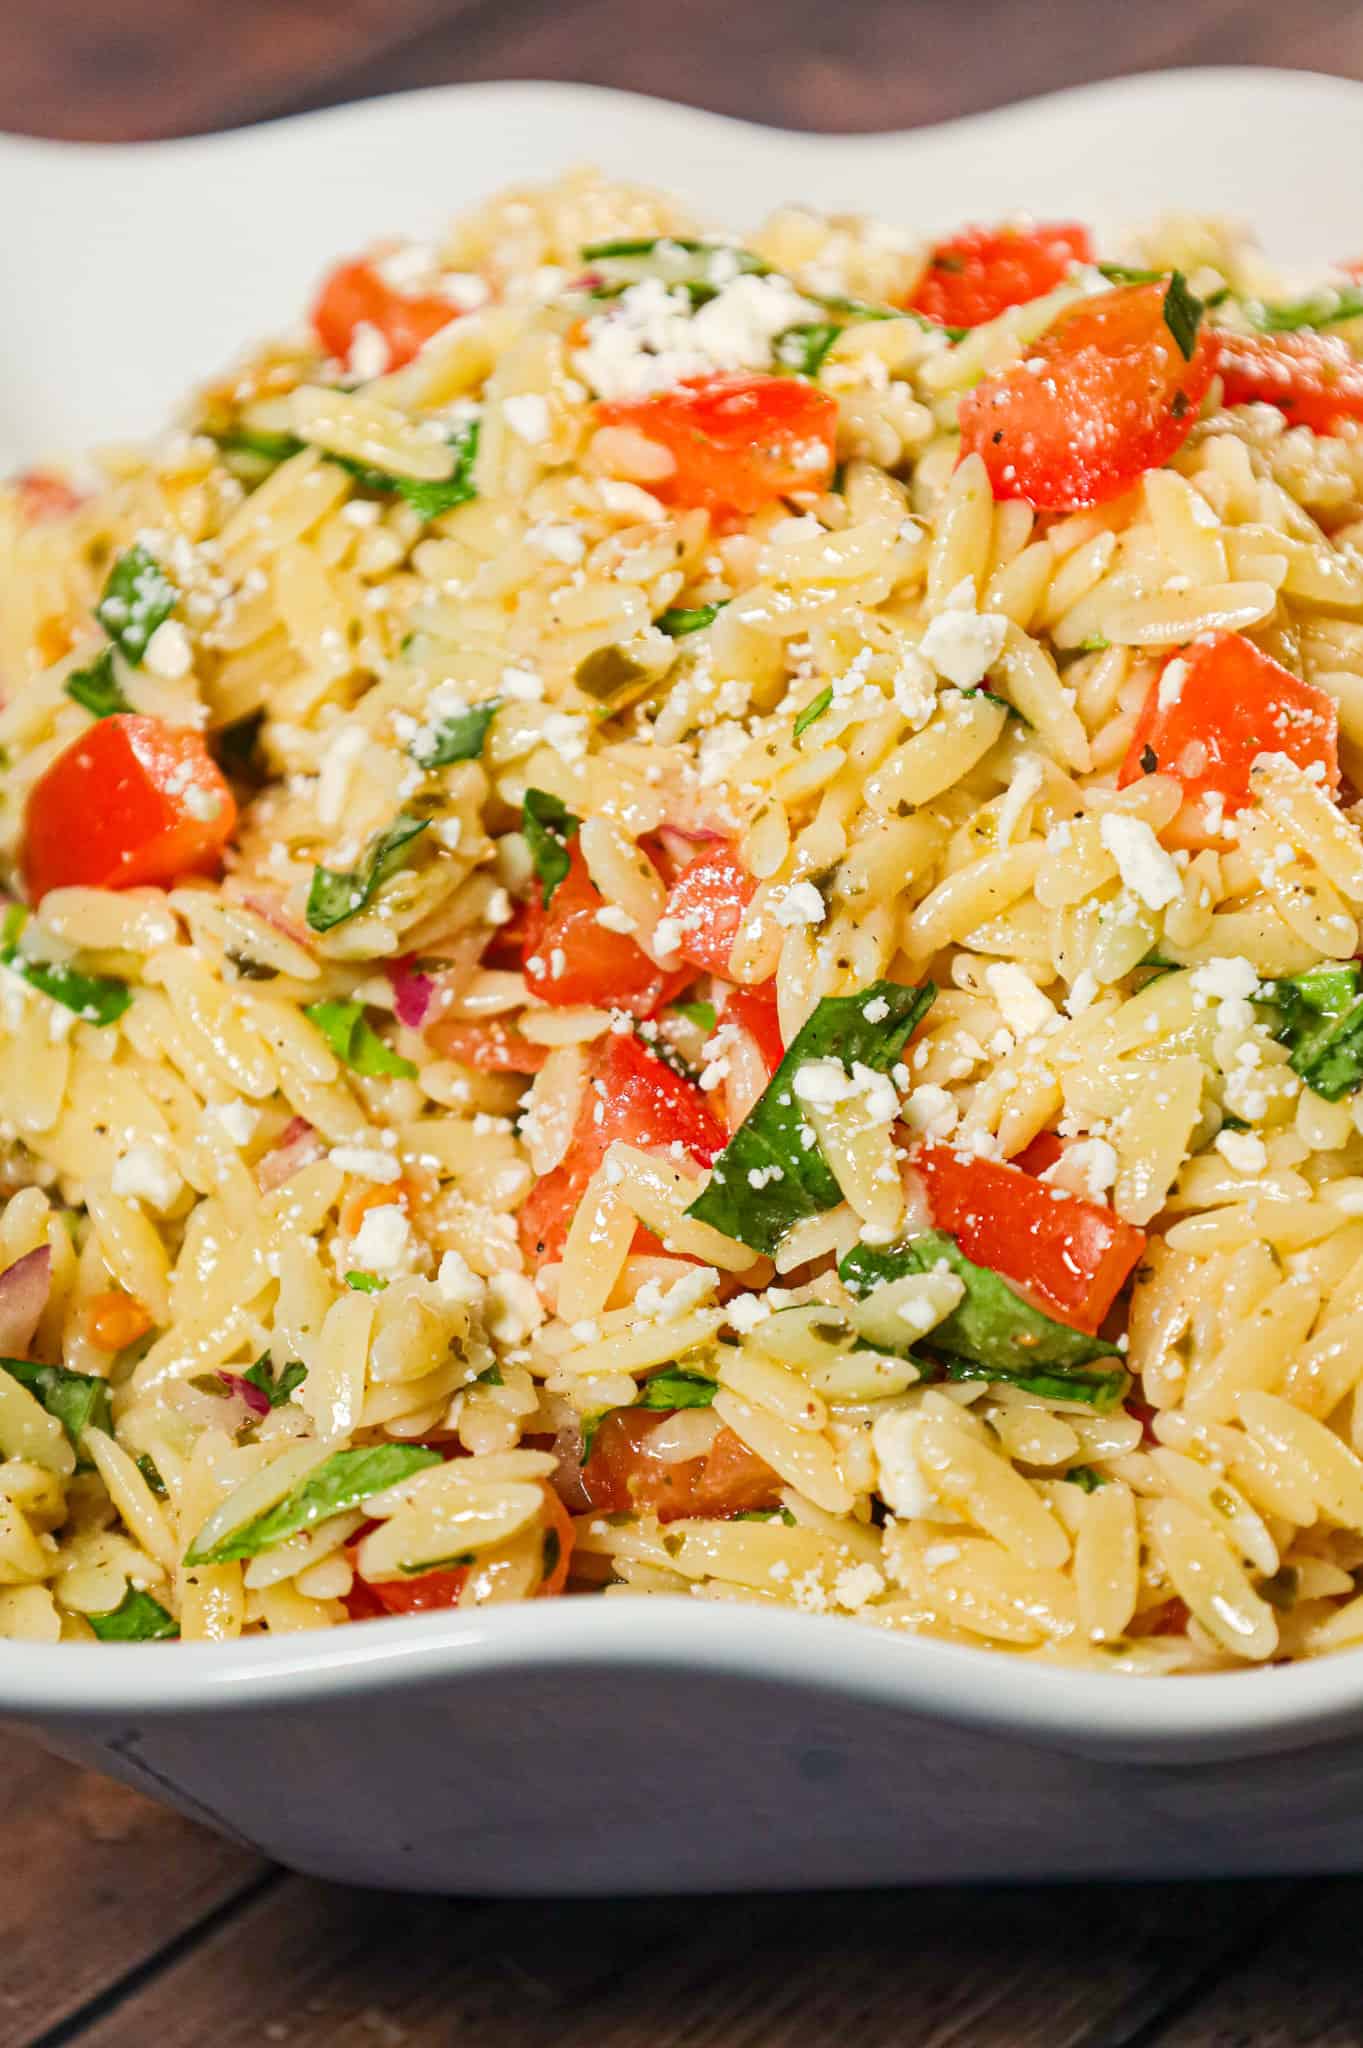 Bruschetta Orzo Pasta Salad is a tasty side dish recipe loaded with fresh diced tomatoes, red onions, fresh basil, garlic and feta cheese.